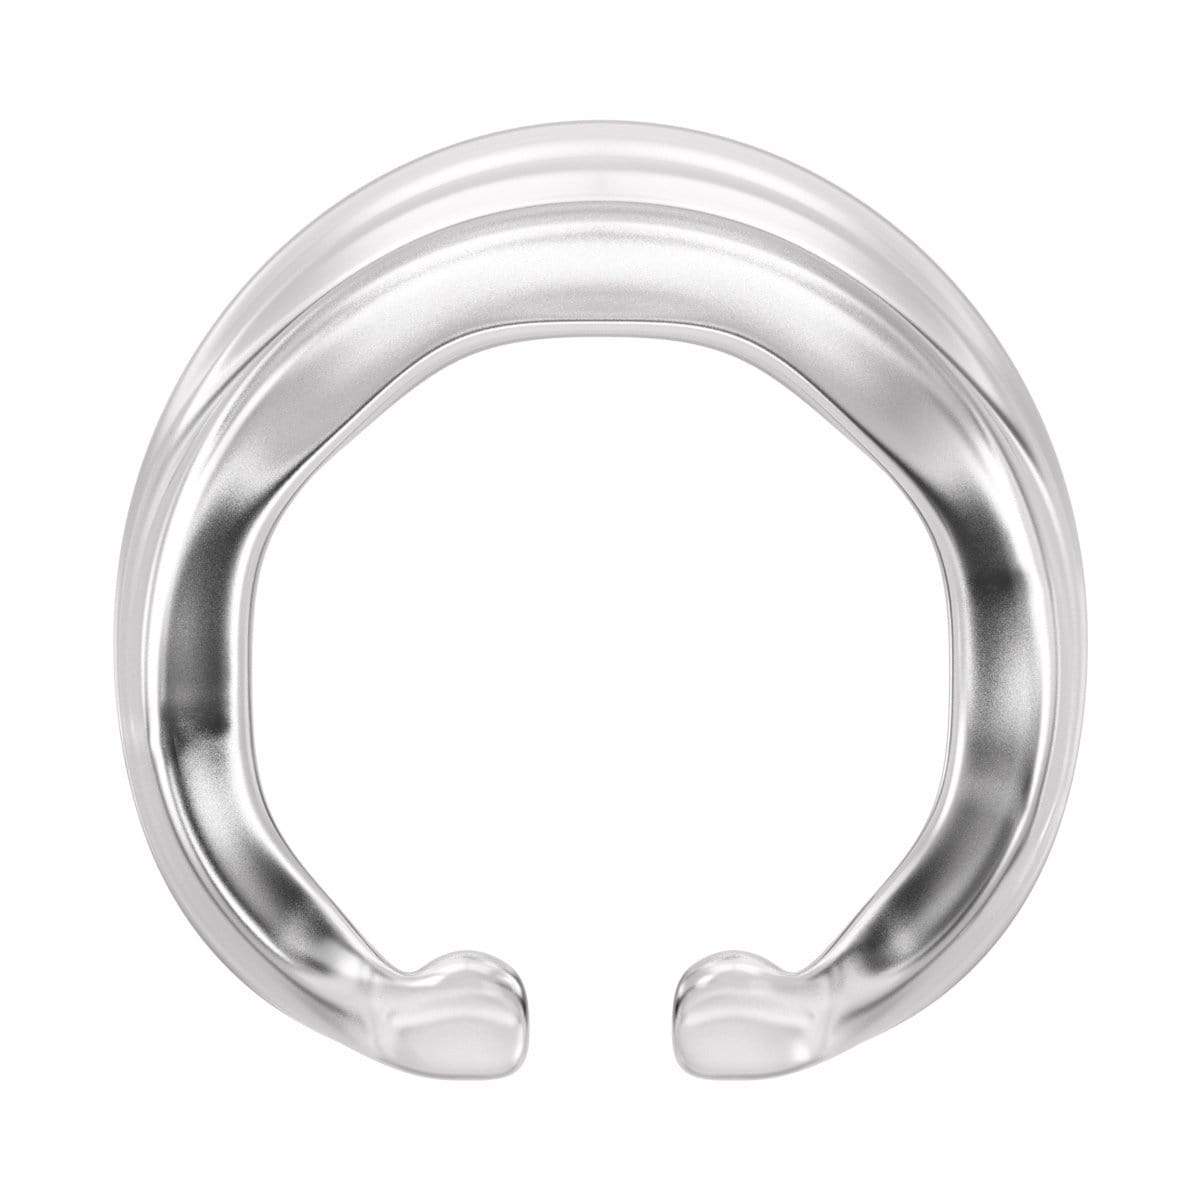 SSI Japan - My Peace Wide Standard Day Correction Cock Ring CherryAffairs